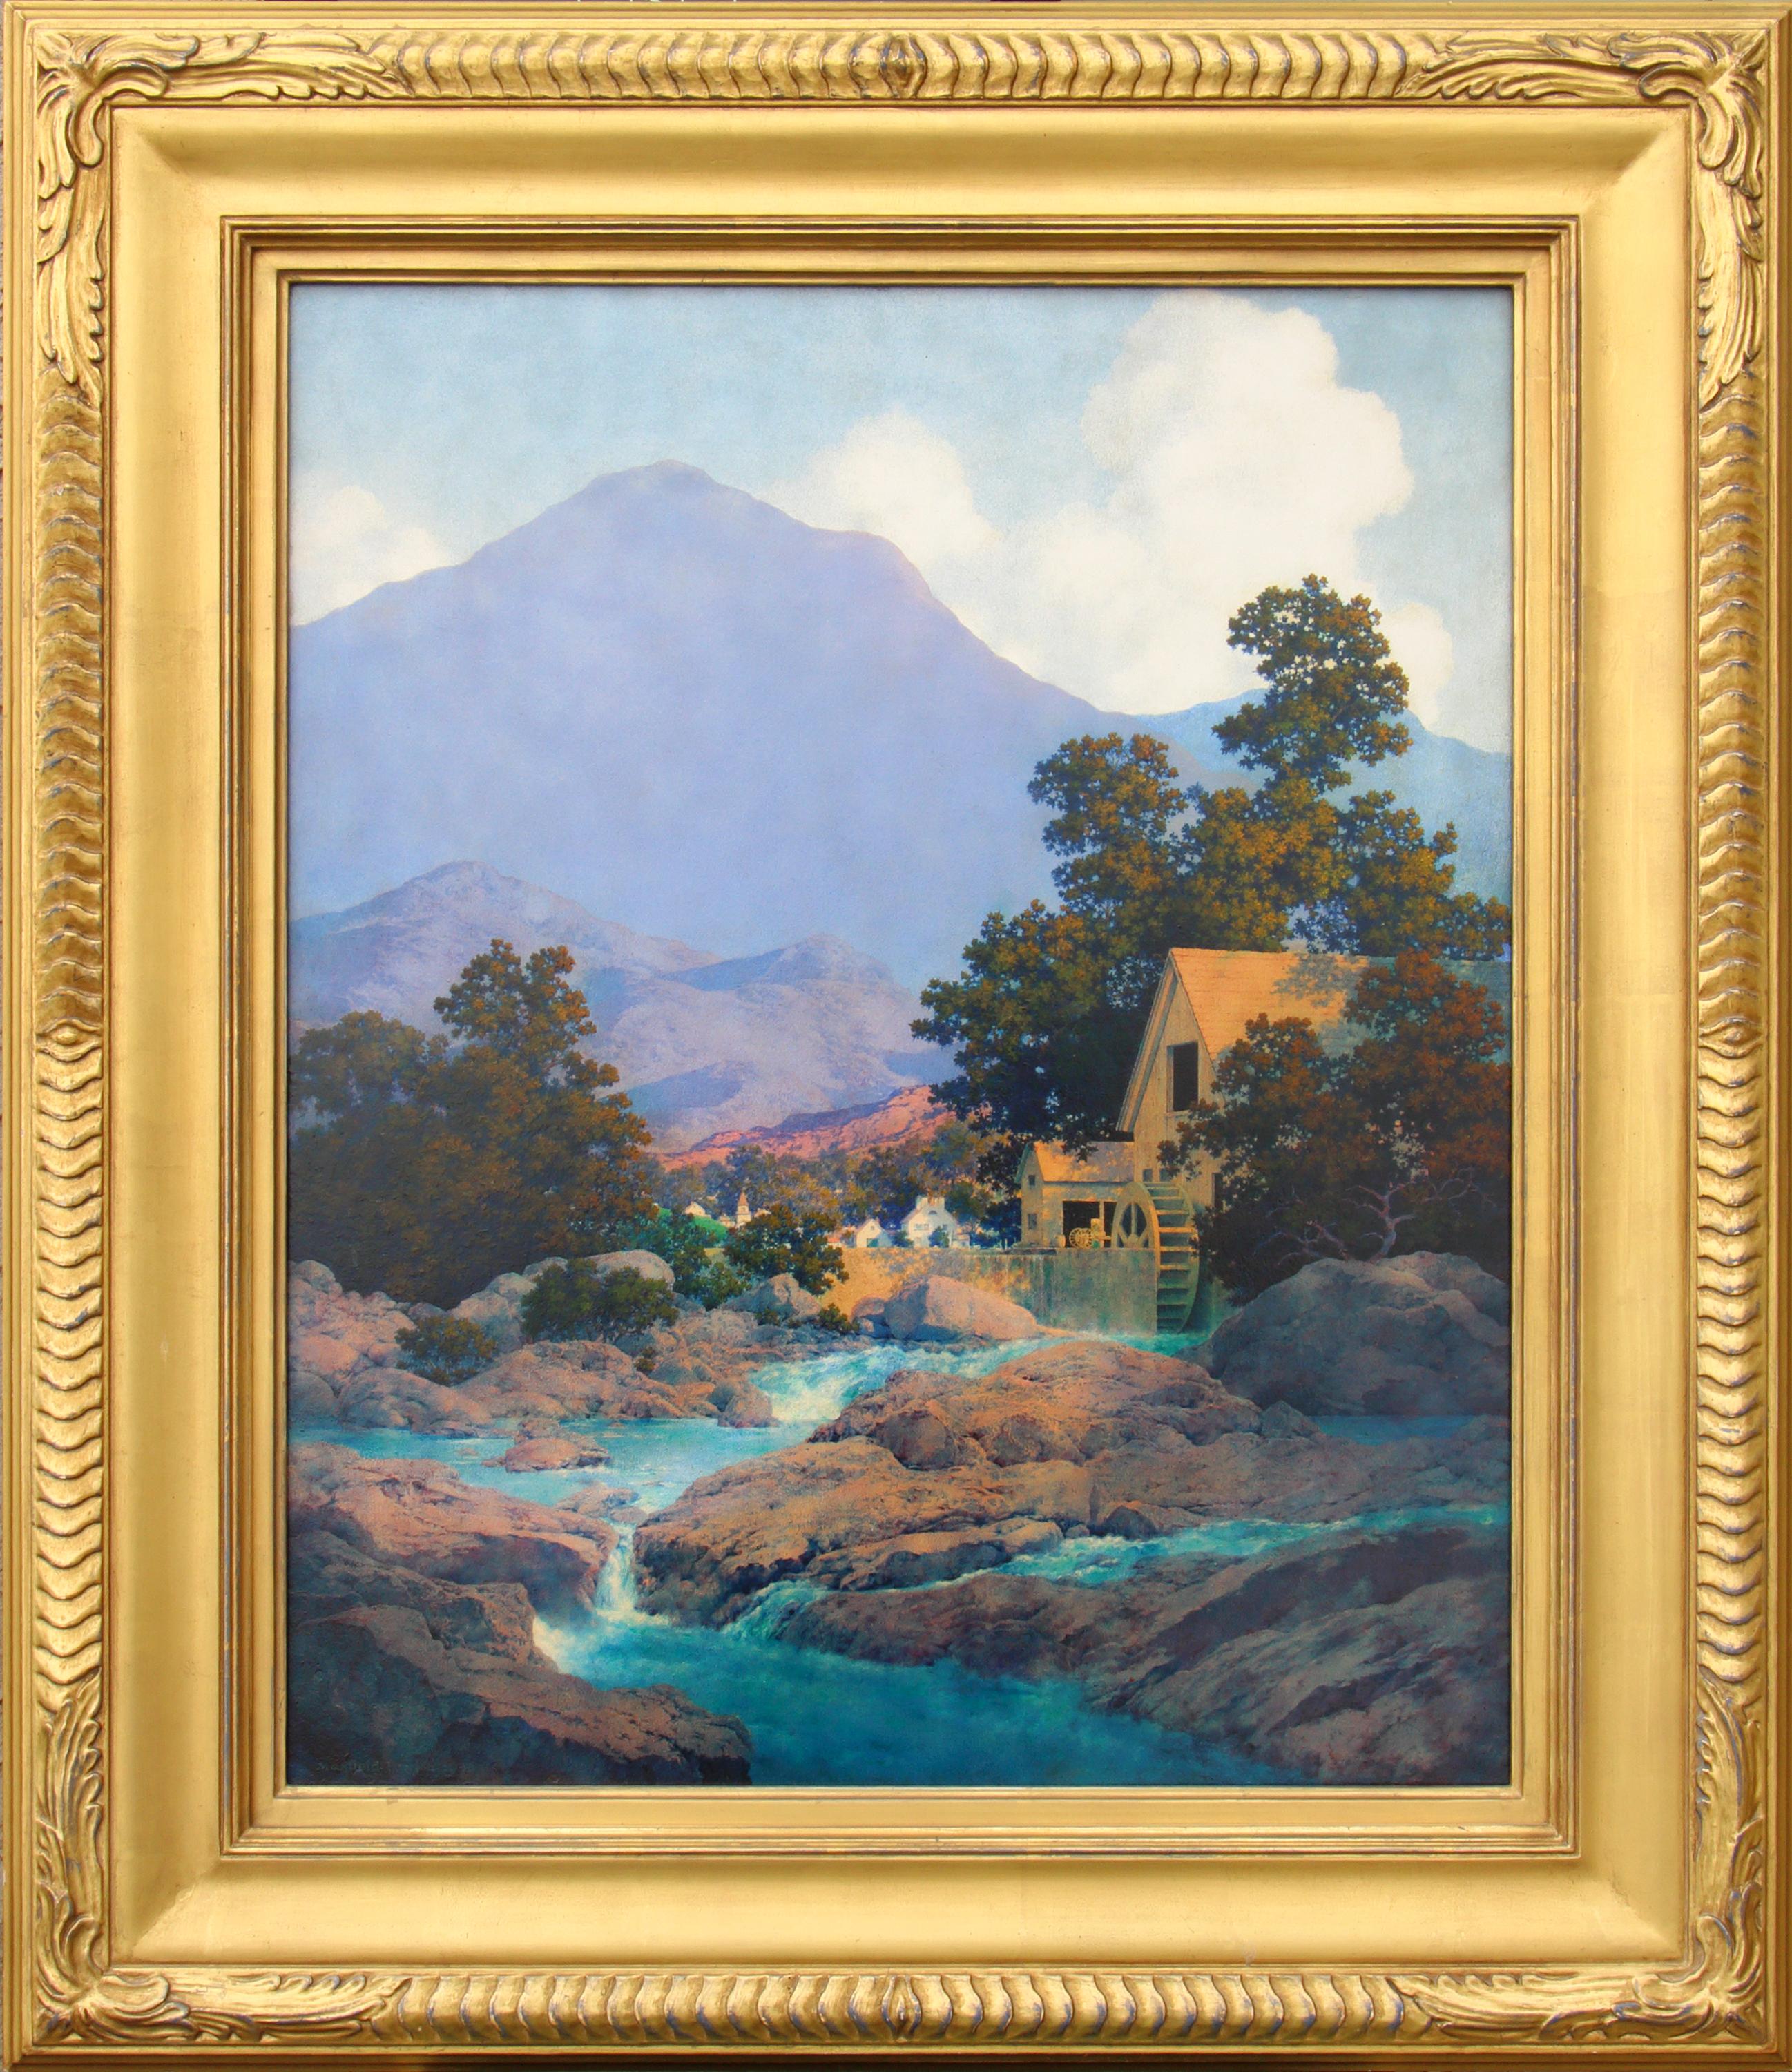 The Old Mill - Painting by Maxfield Parrish